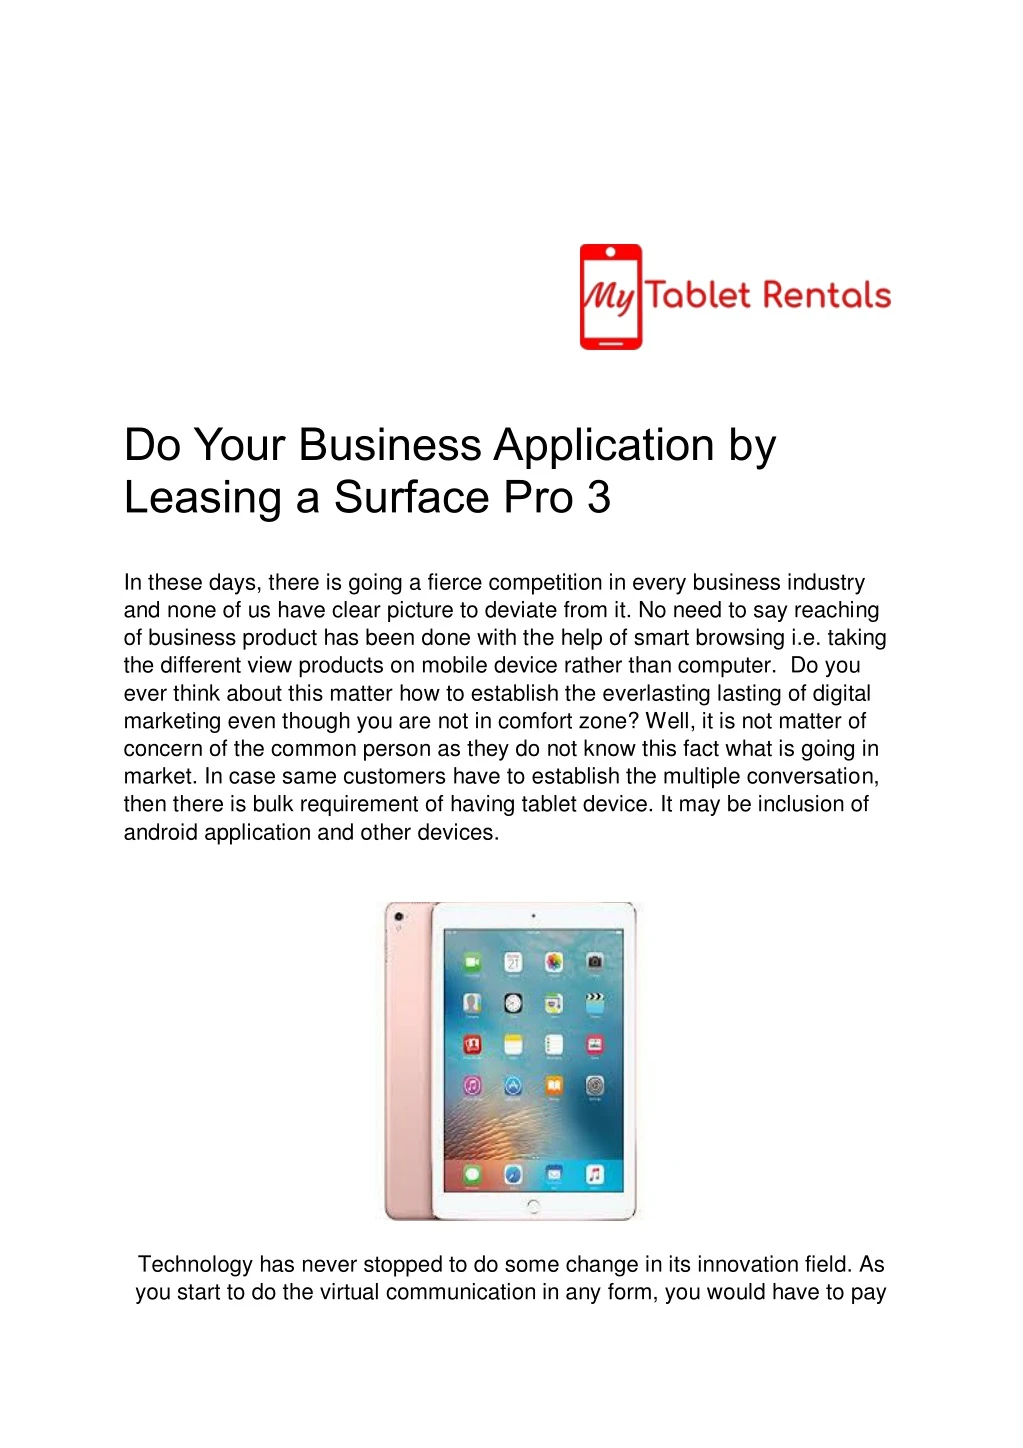 do your business application by leasing a surface